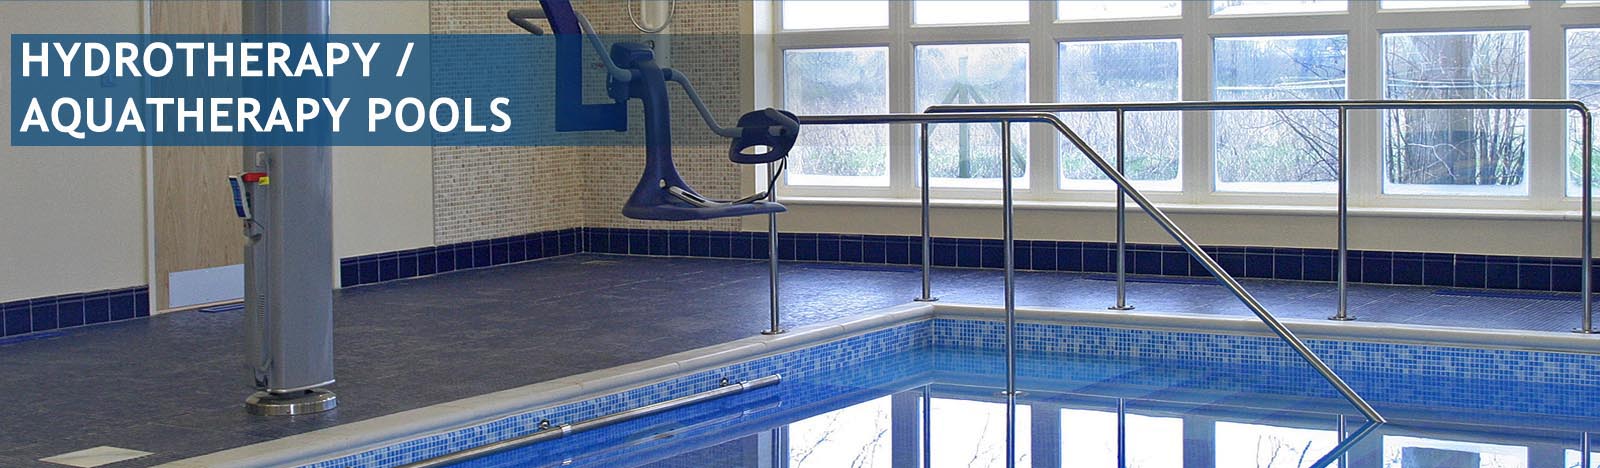 hydrotherapy pools specialists wales